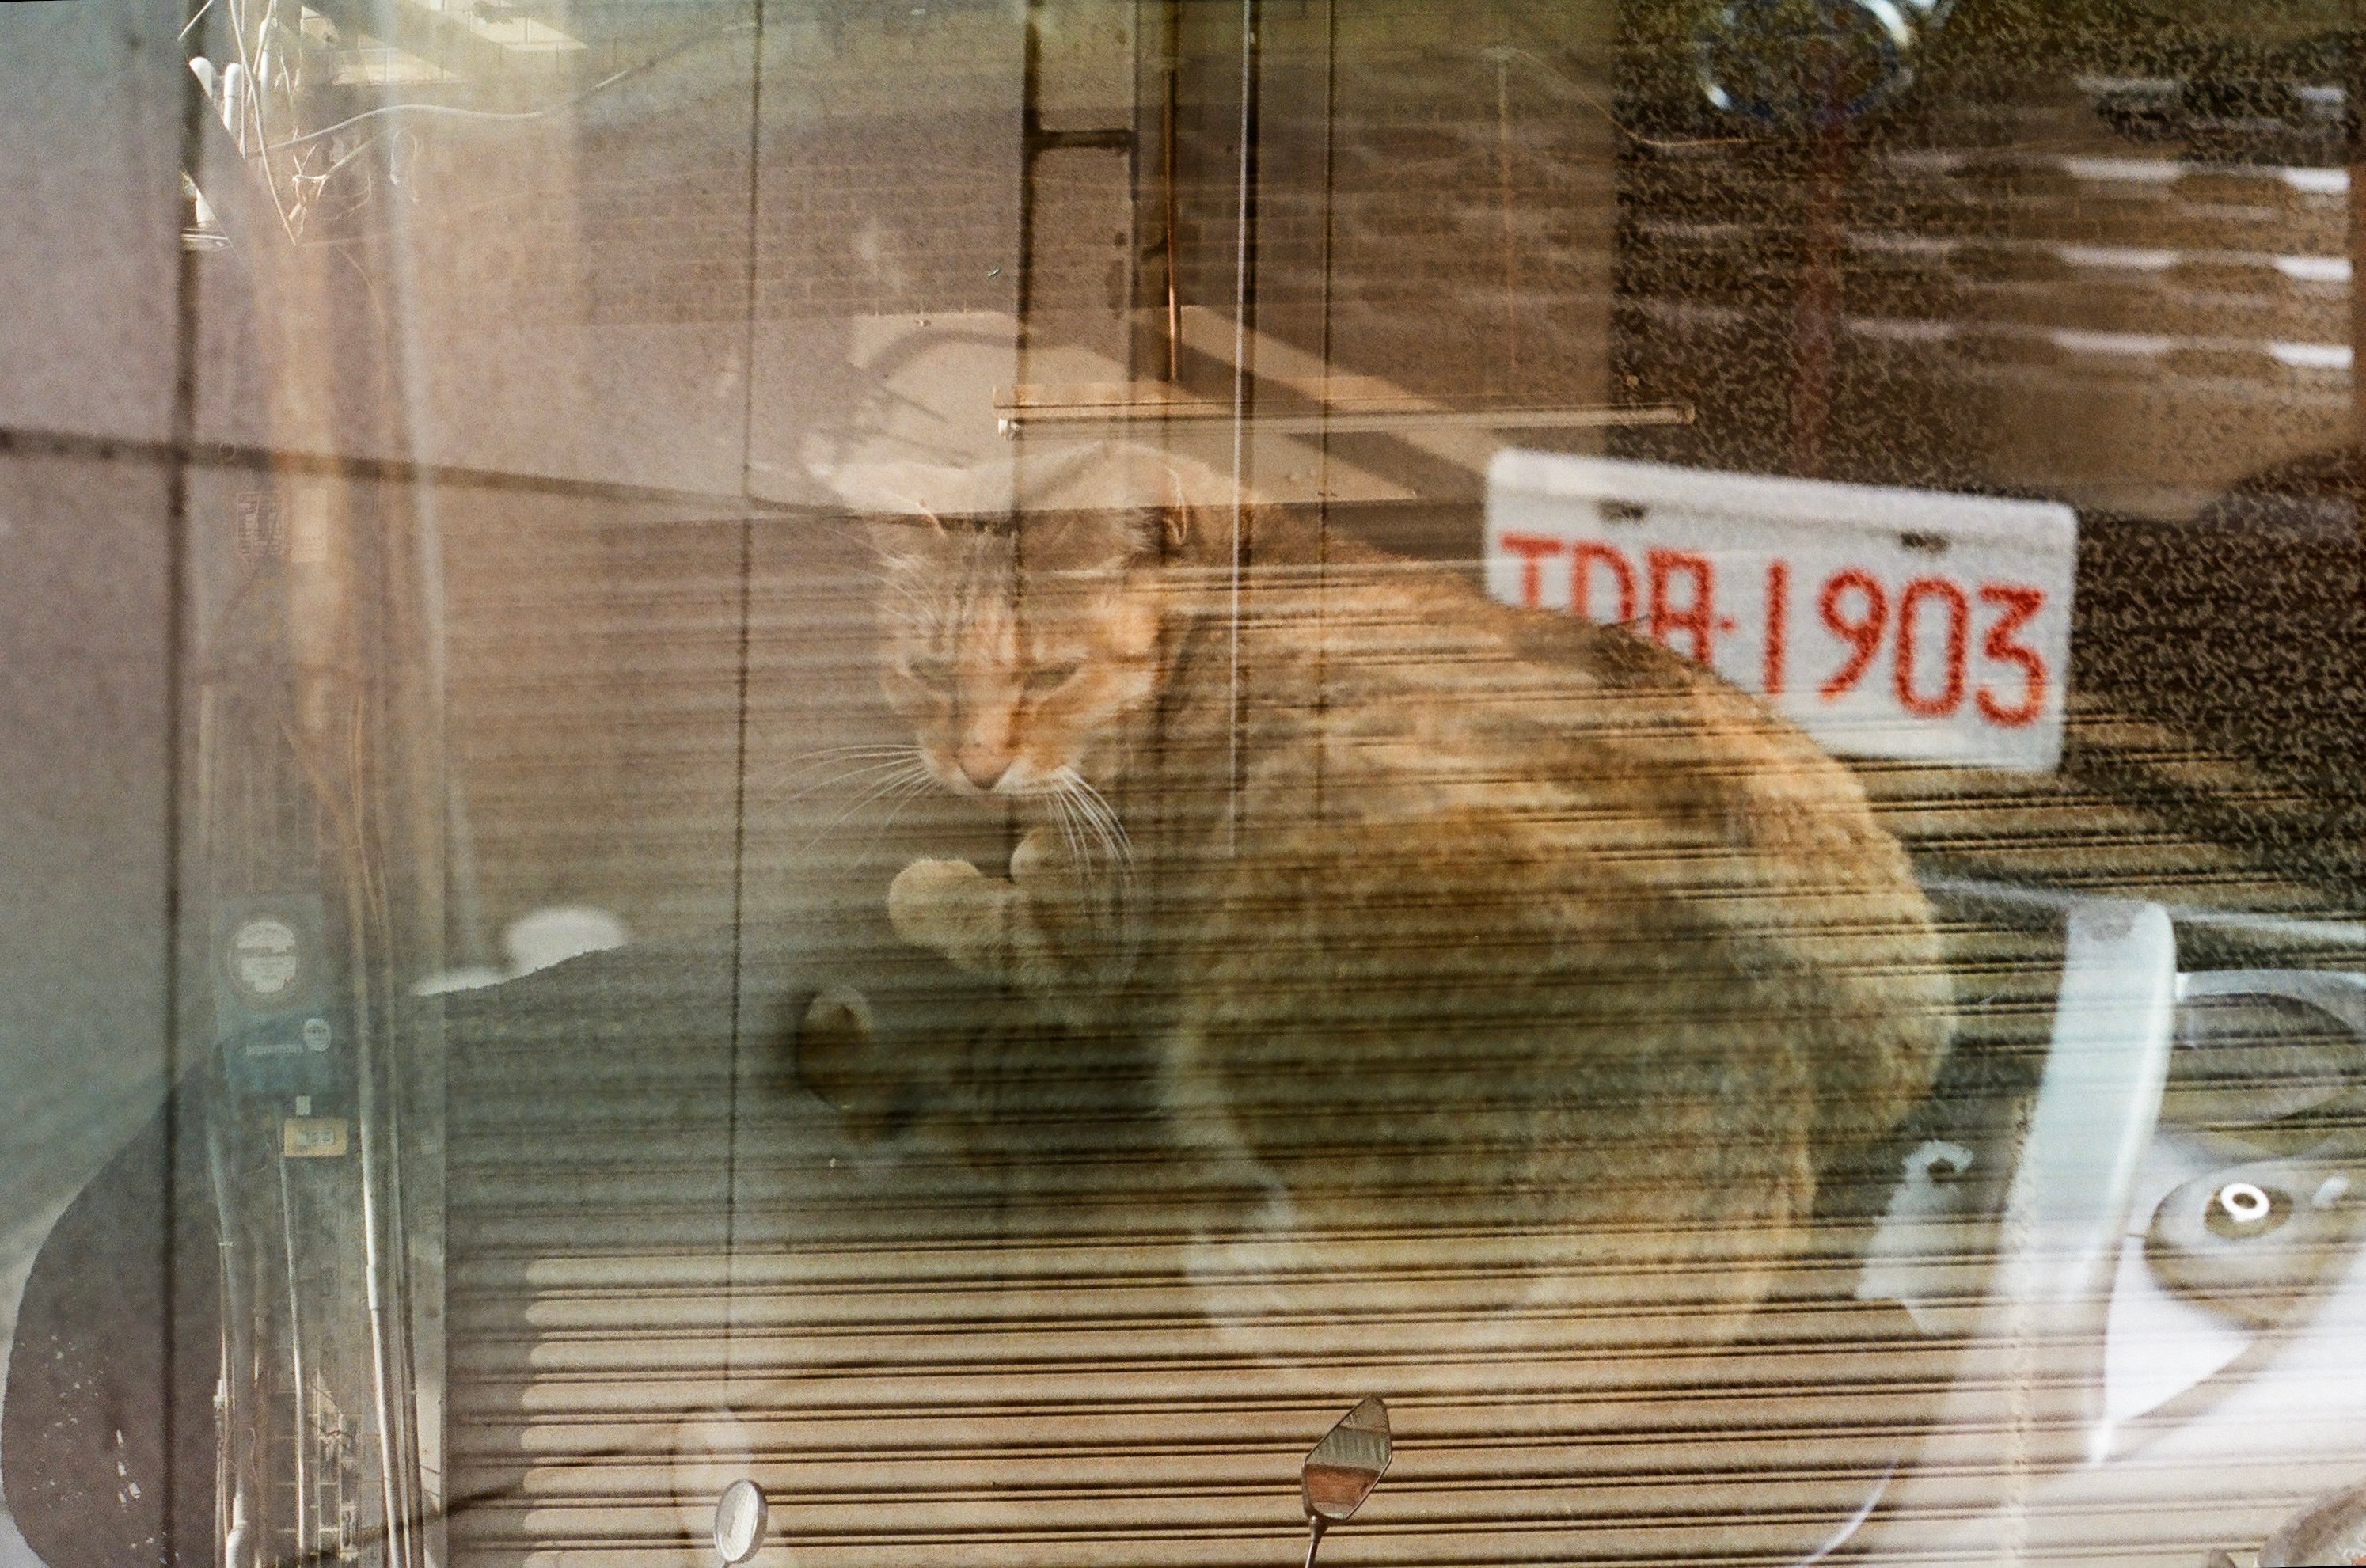 a cat sitting on a scooter from a window reflection